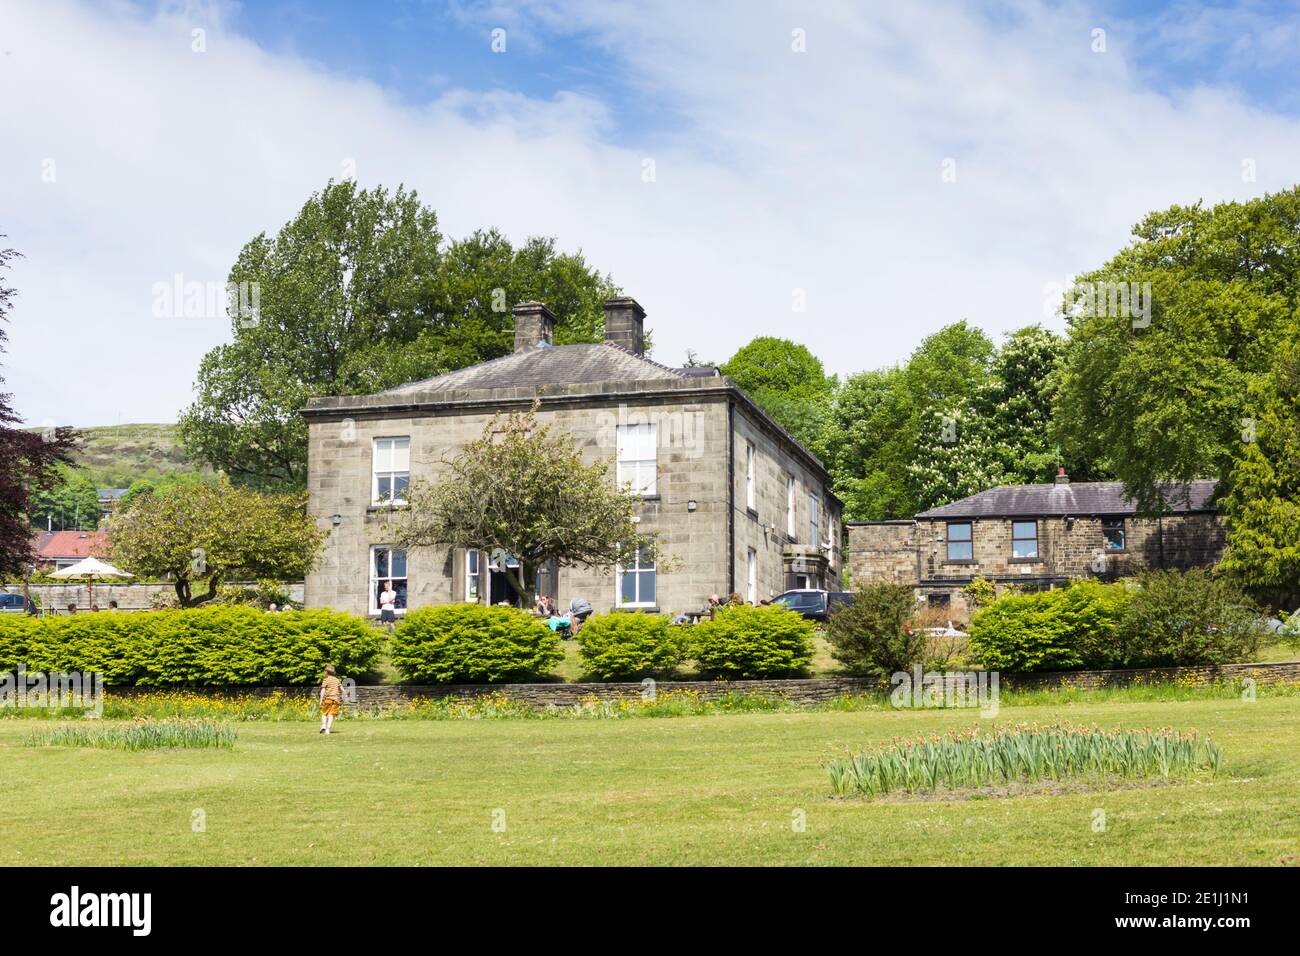 The Whitaker museum and art gallery, Rawtenstall, Lancashire. Built in 1840 as a home, it was bought around 1900 by Richard Whitaker to be a museum. Stock Photo